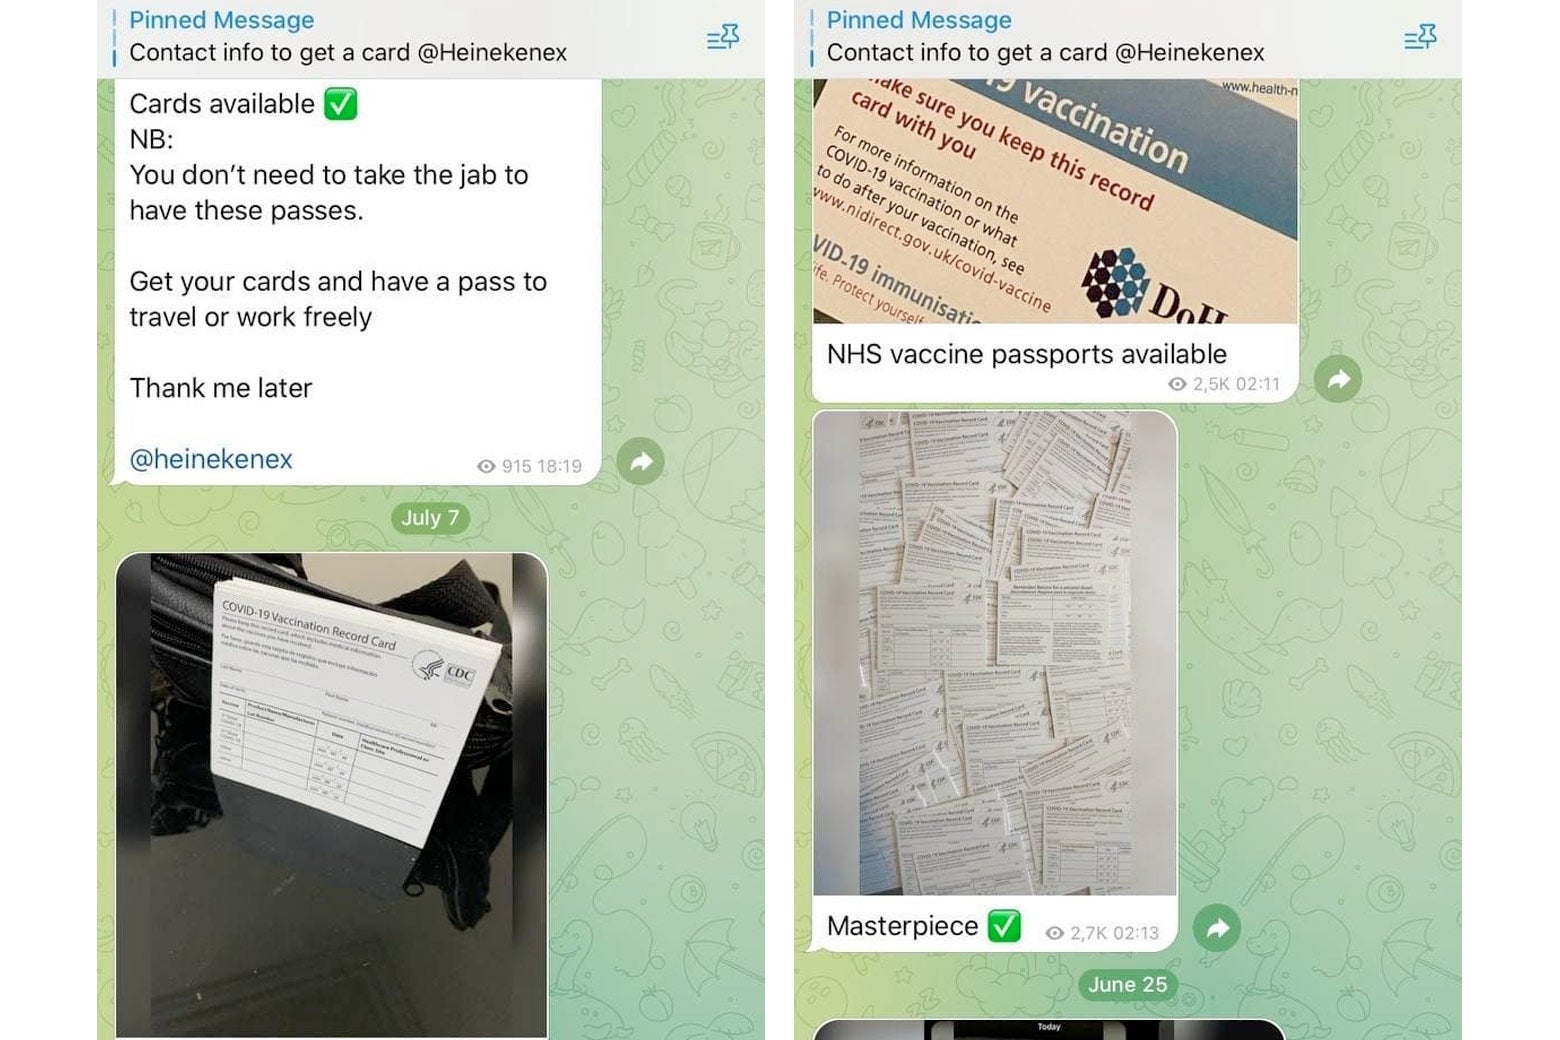 Posts advertising fraudulent vaccine cards in a chat app.